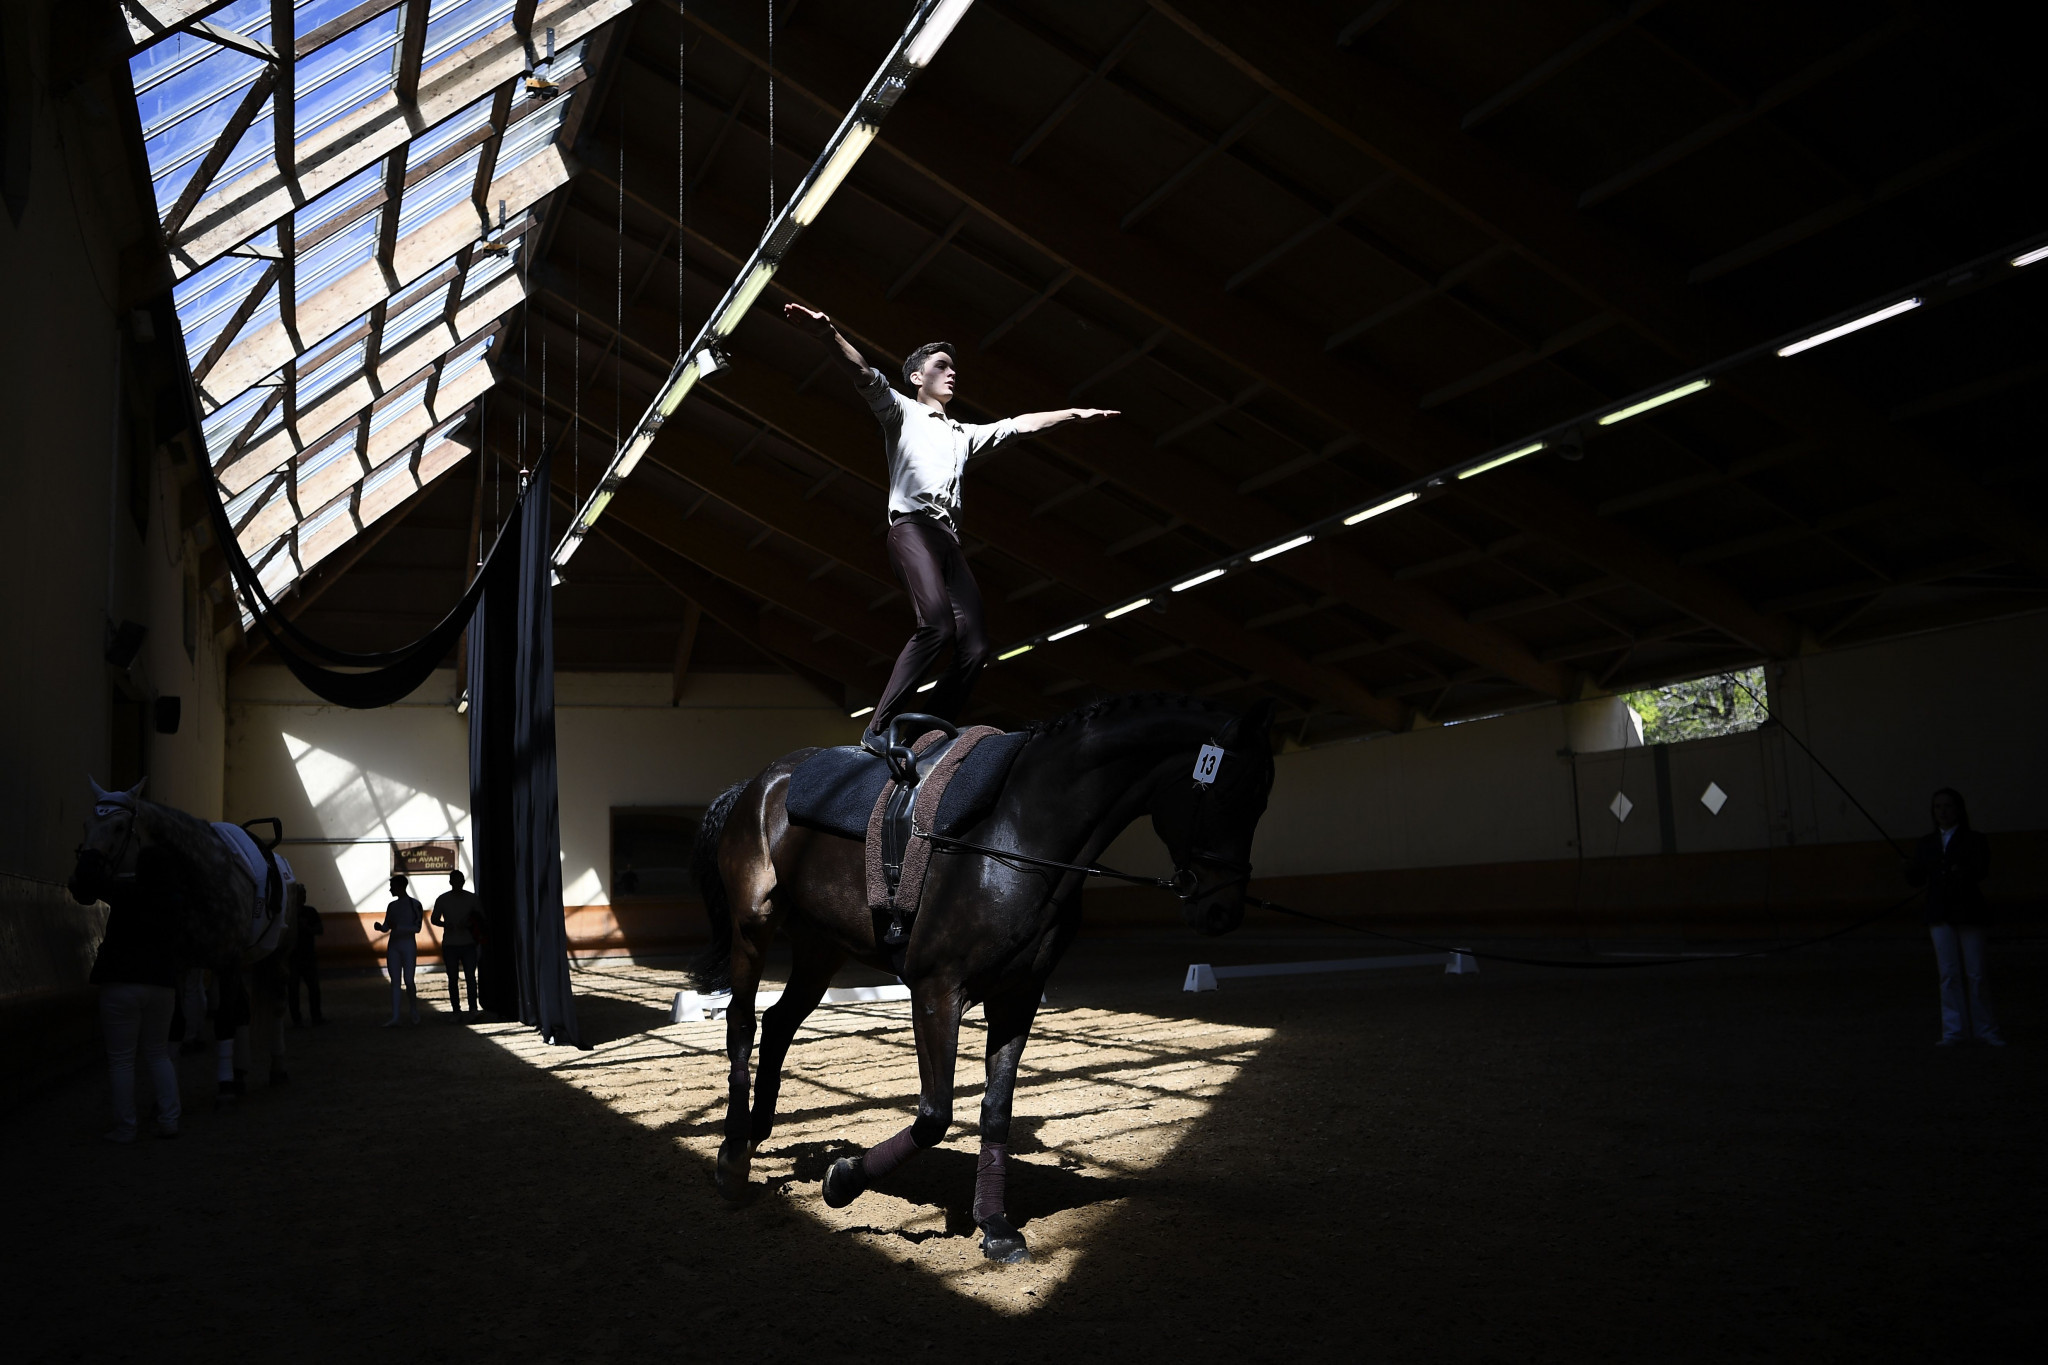 Vaulting grew by 614 per cent since 2007 ©Getty Images